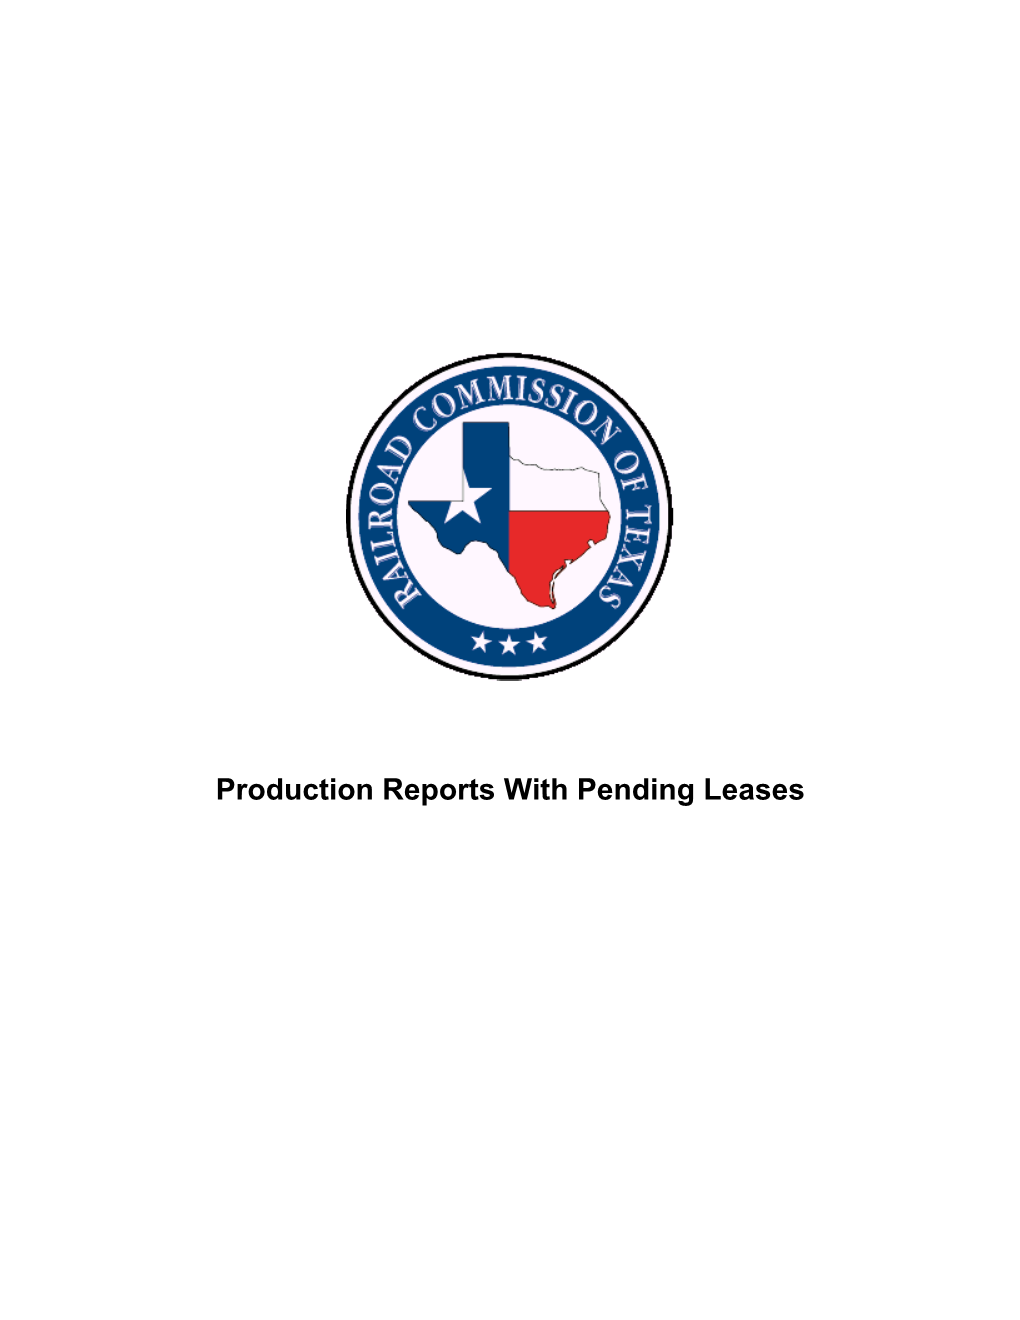 Production Reports with Pending Leases